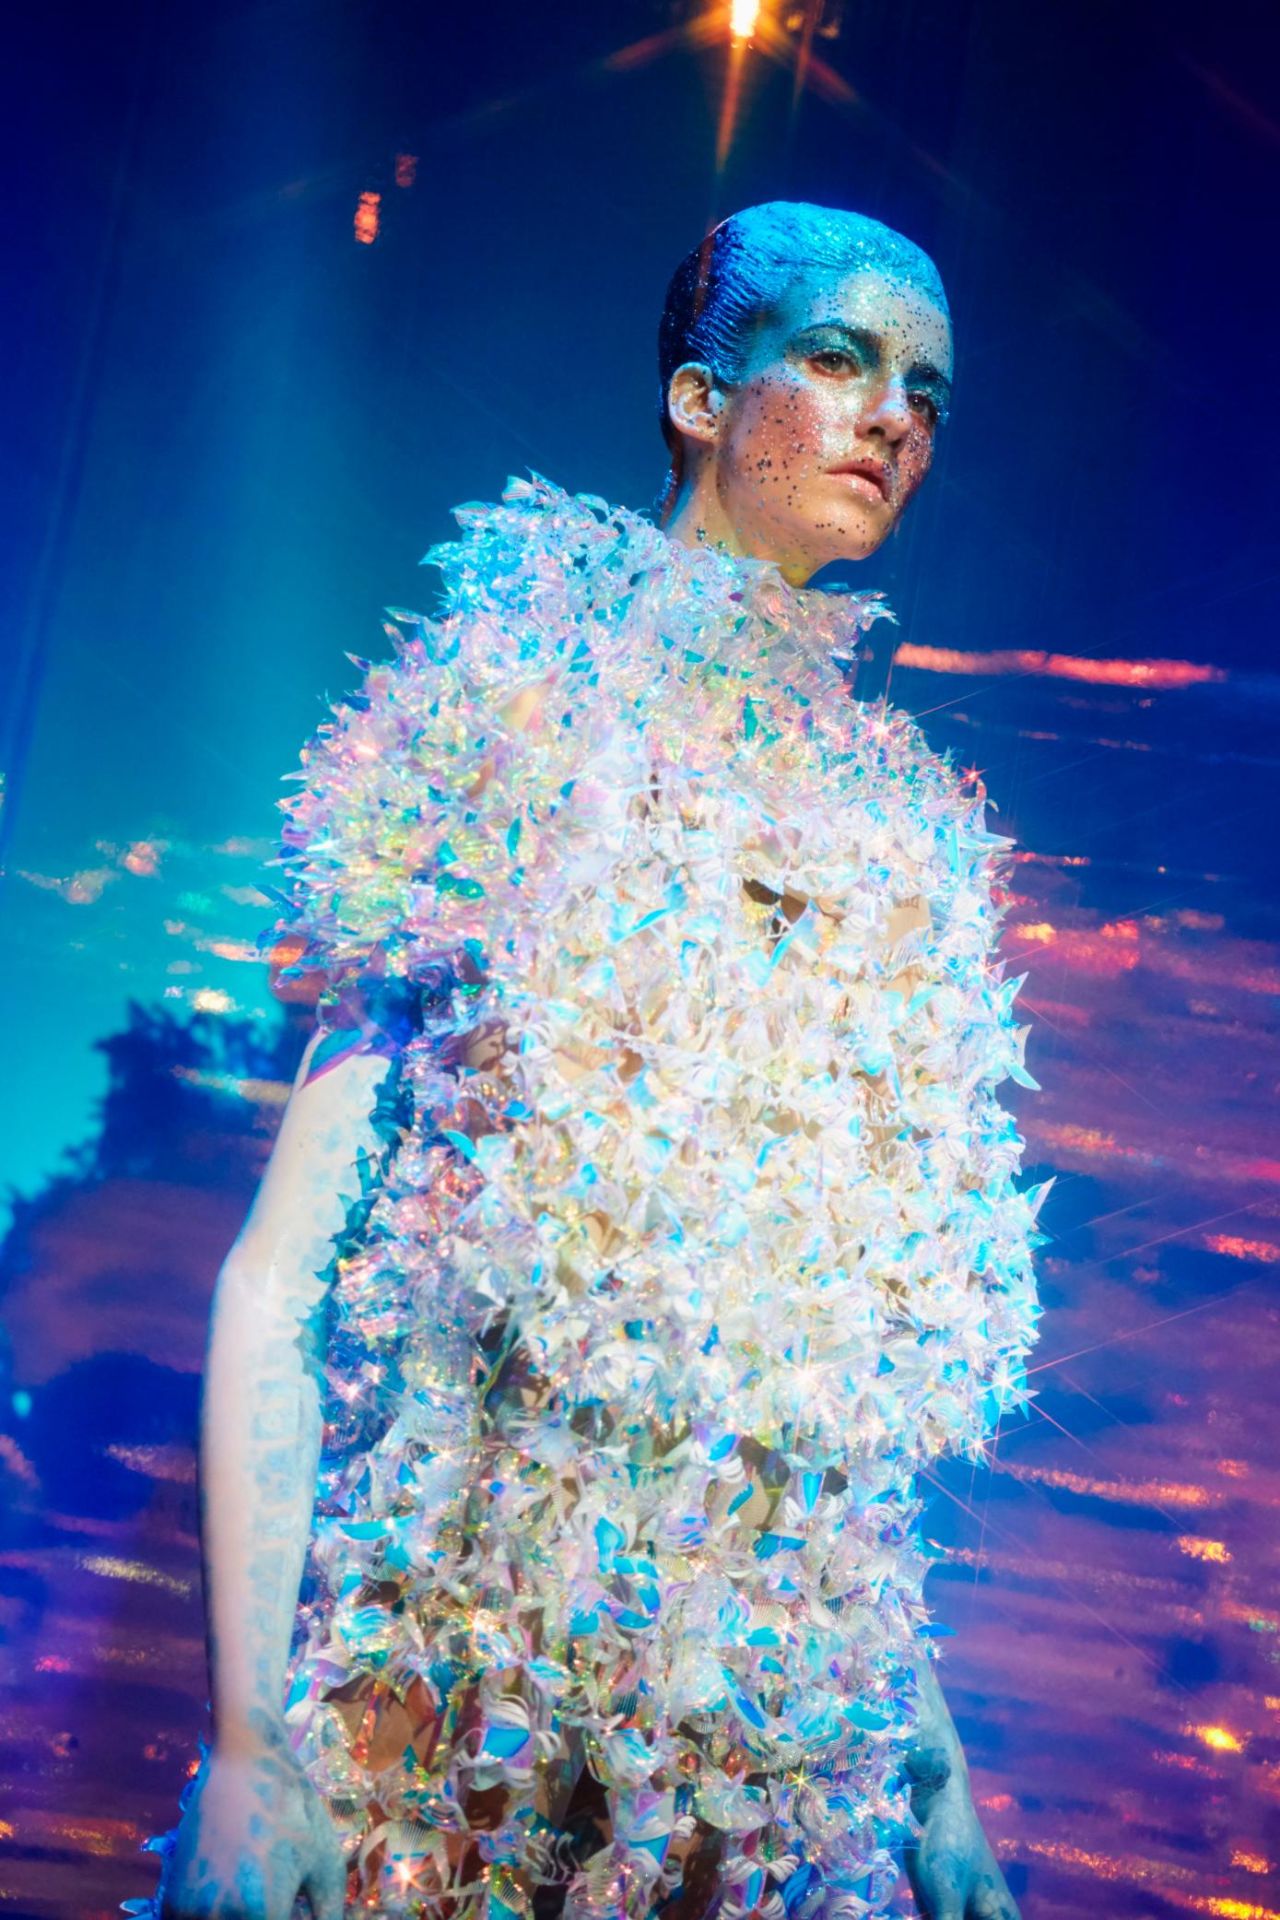 For his collection "Hologram," Nakazato produced items from thousands of pieces of highly-reflective holographic film.